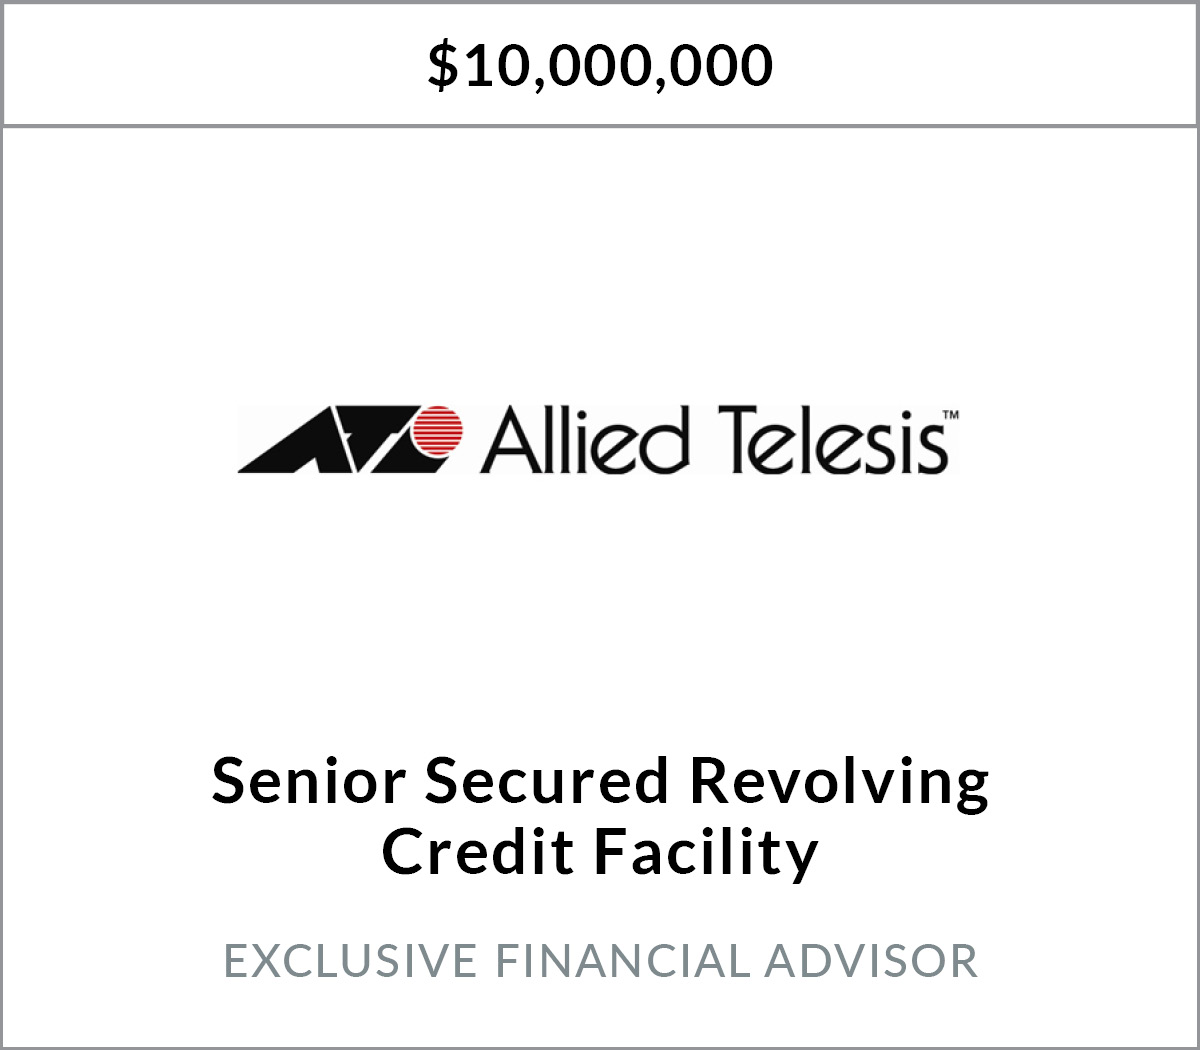 Allied Telesis Enters into $10 mm Revolver Line